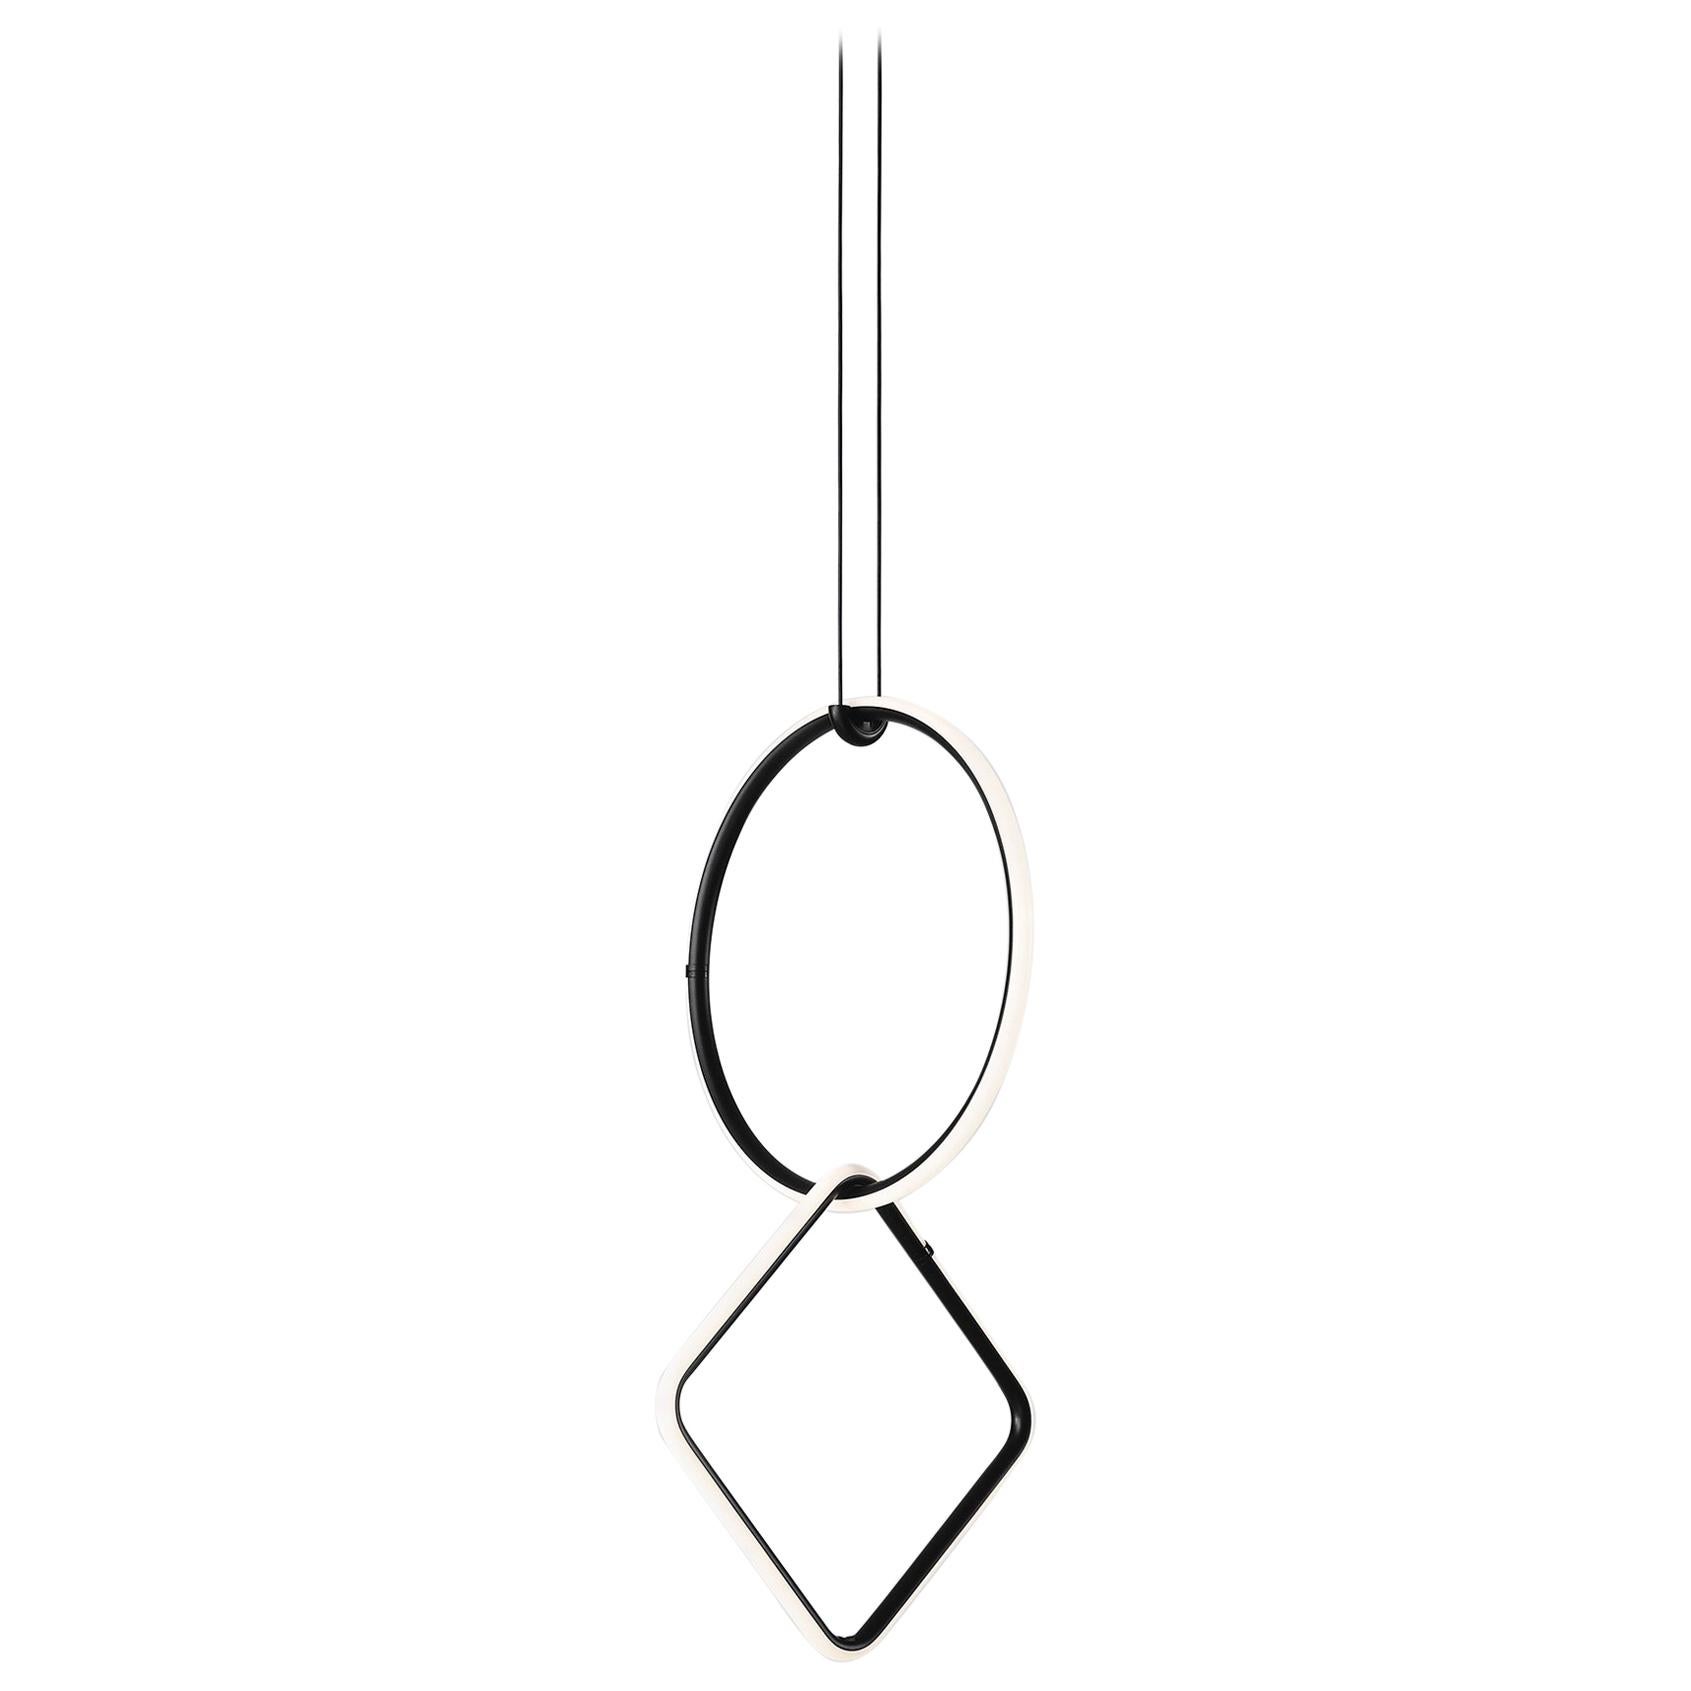 FLOS Small Circle and Square Arrangements Light by Michael Anastassiades